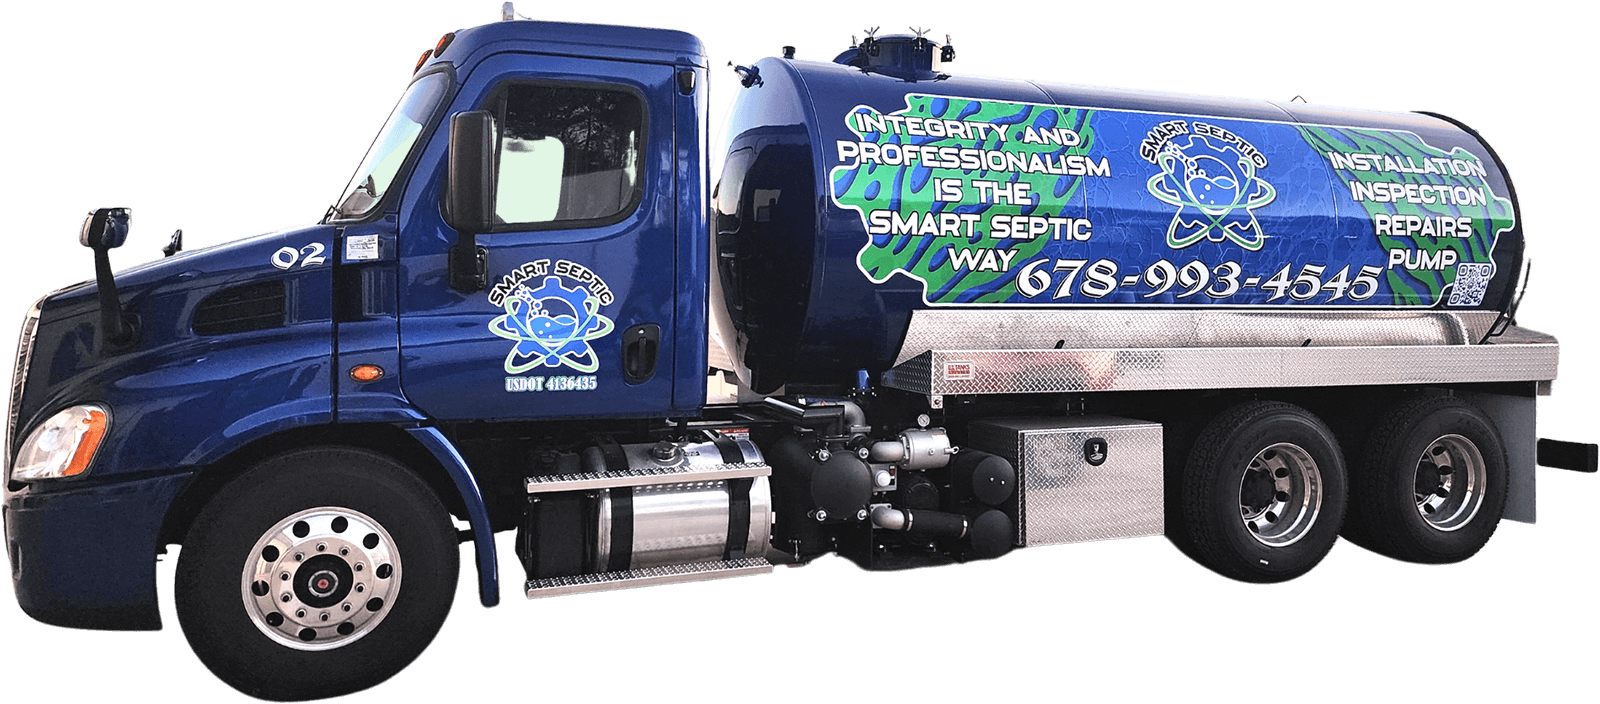 A blue truck with a green septic tank company logo on it.